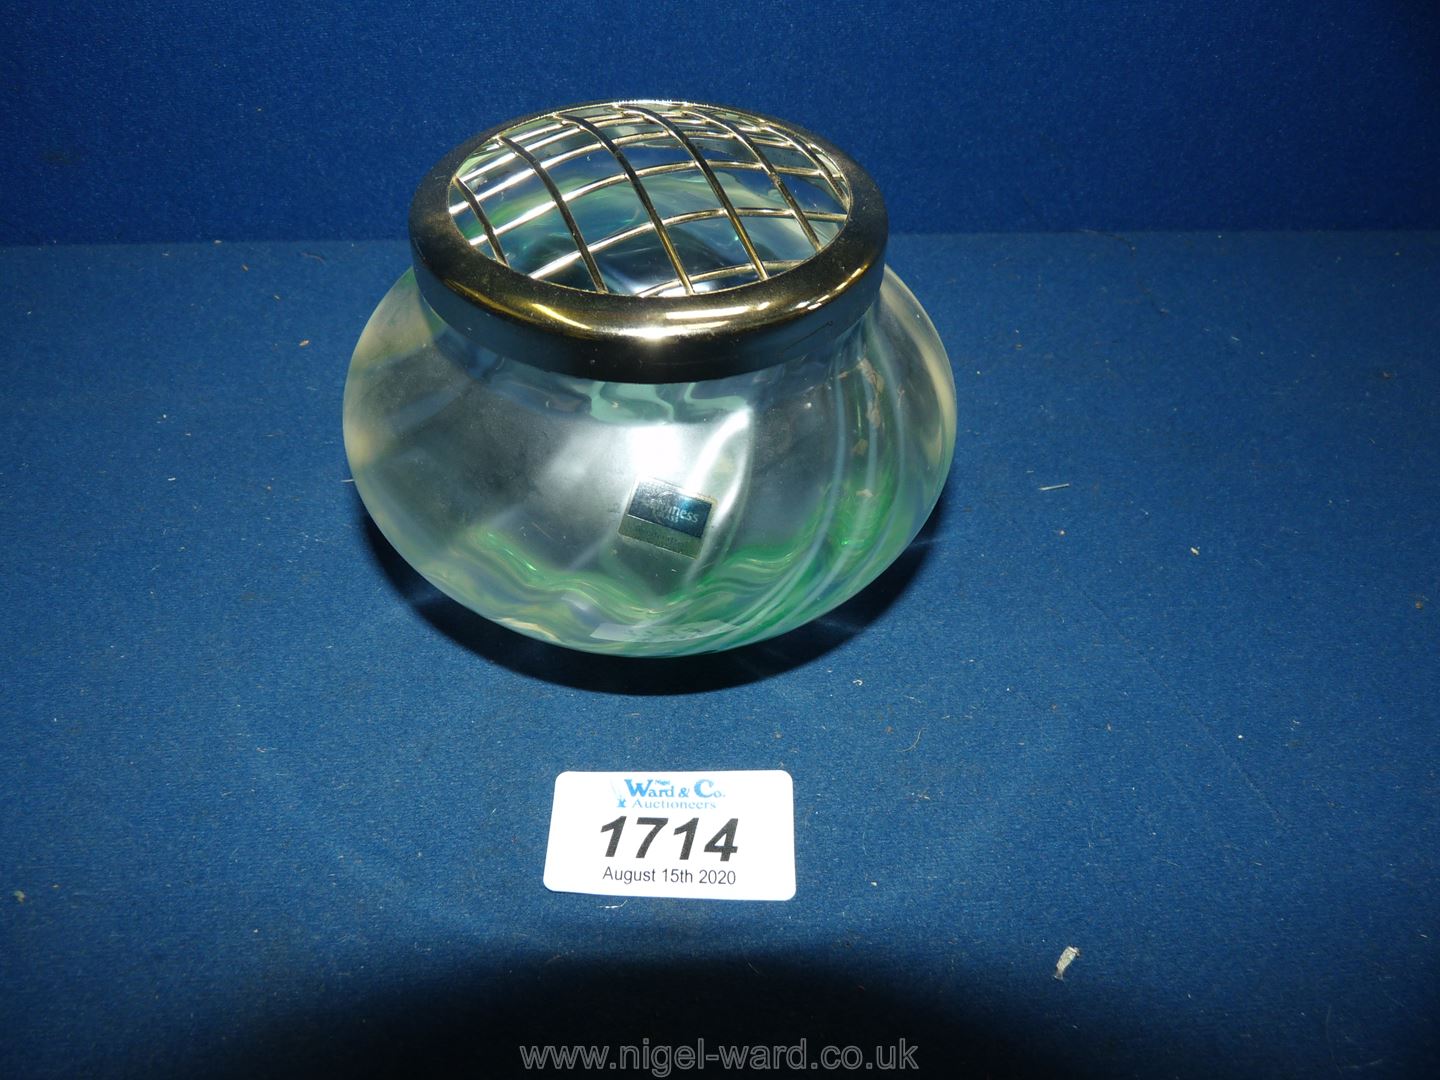 A small Caithness rose bowl in pale green vaseline glass with darker stripes of green to the base.